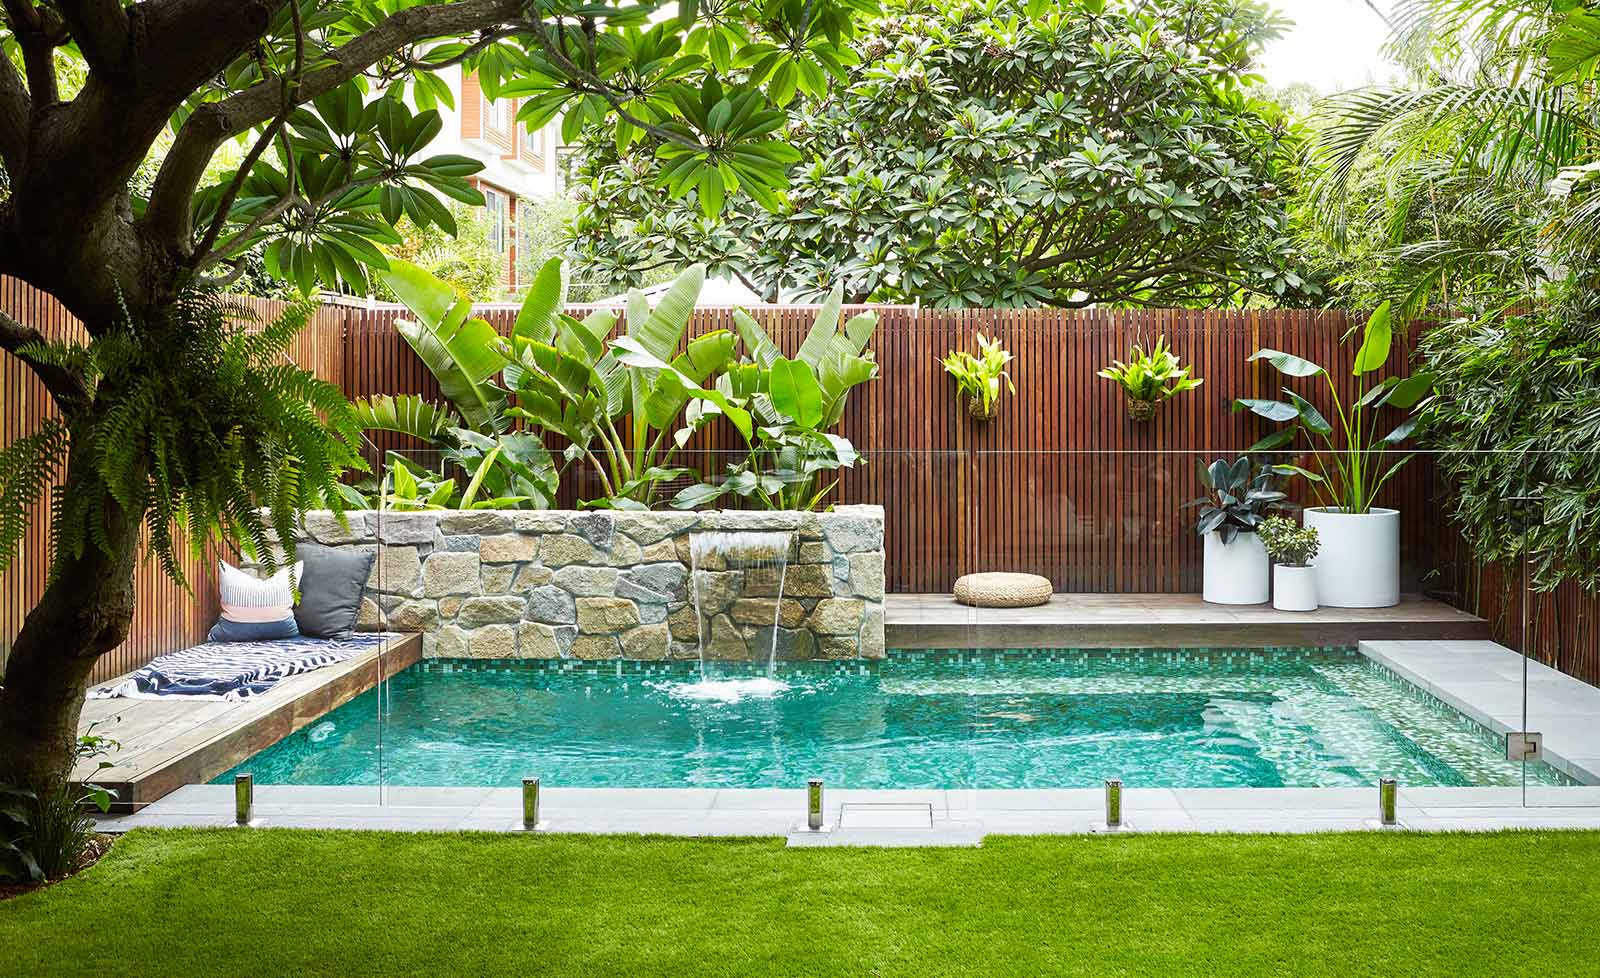 3 Landscaping Tips To Make The Most Of, Pool And Landscaping Brisbane